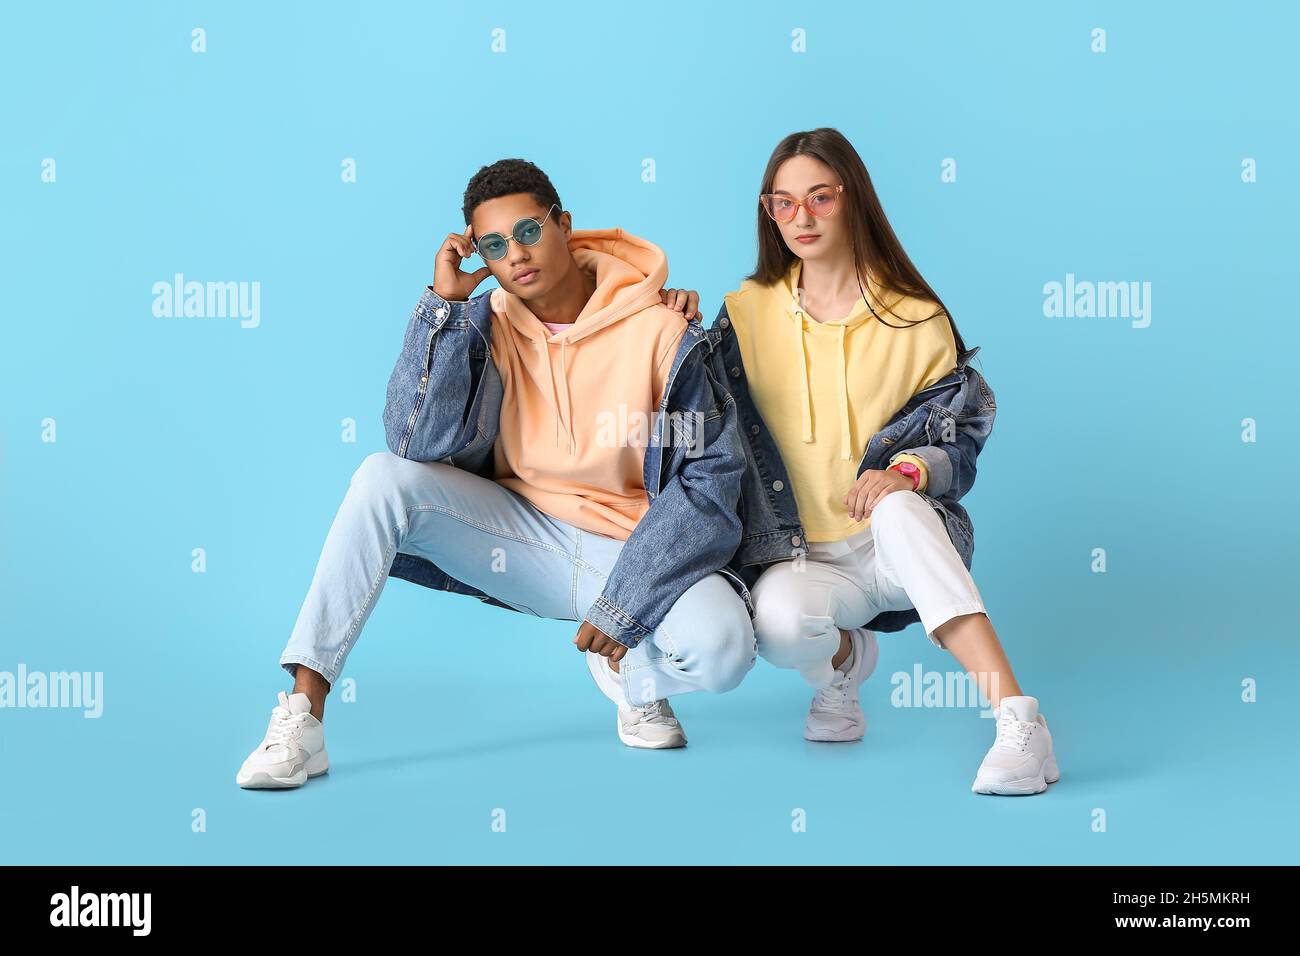 Stylish young couple in hoodies on blue background Stock Photo